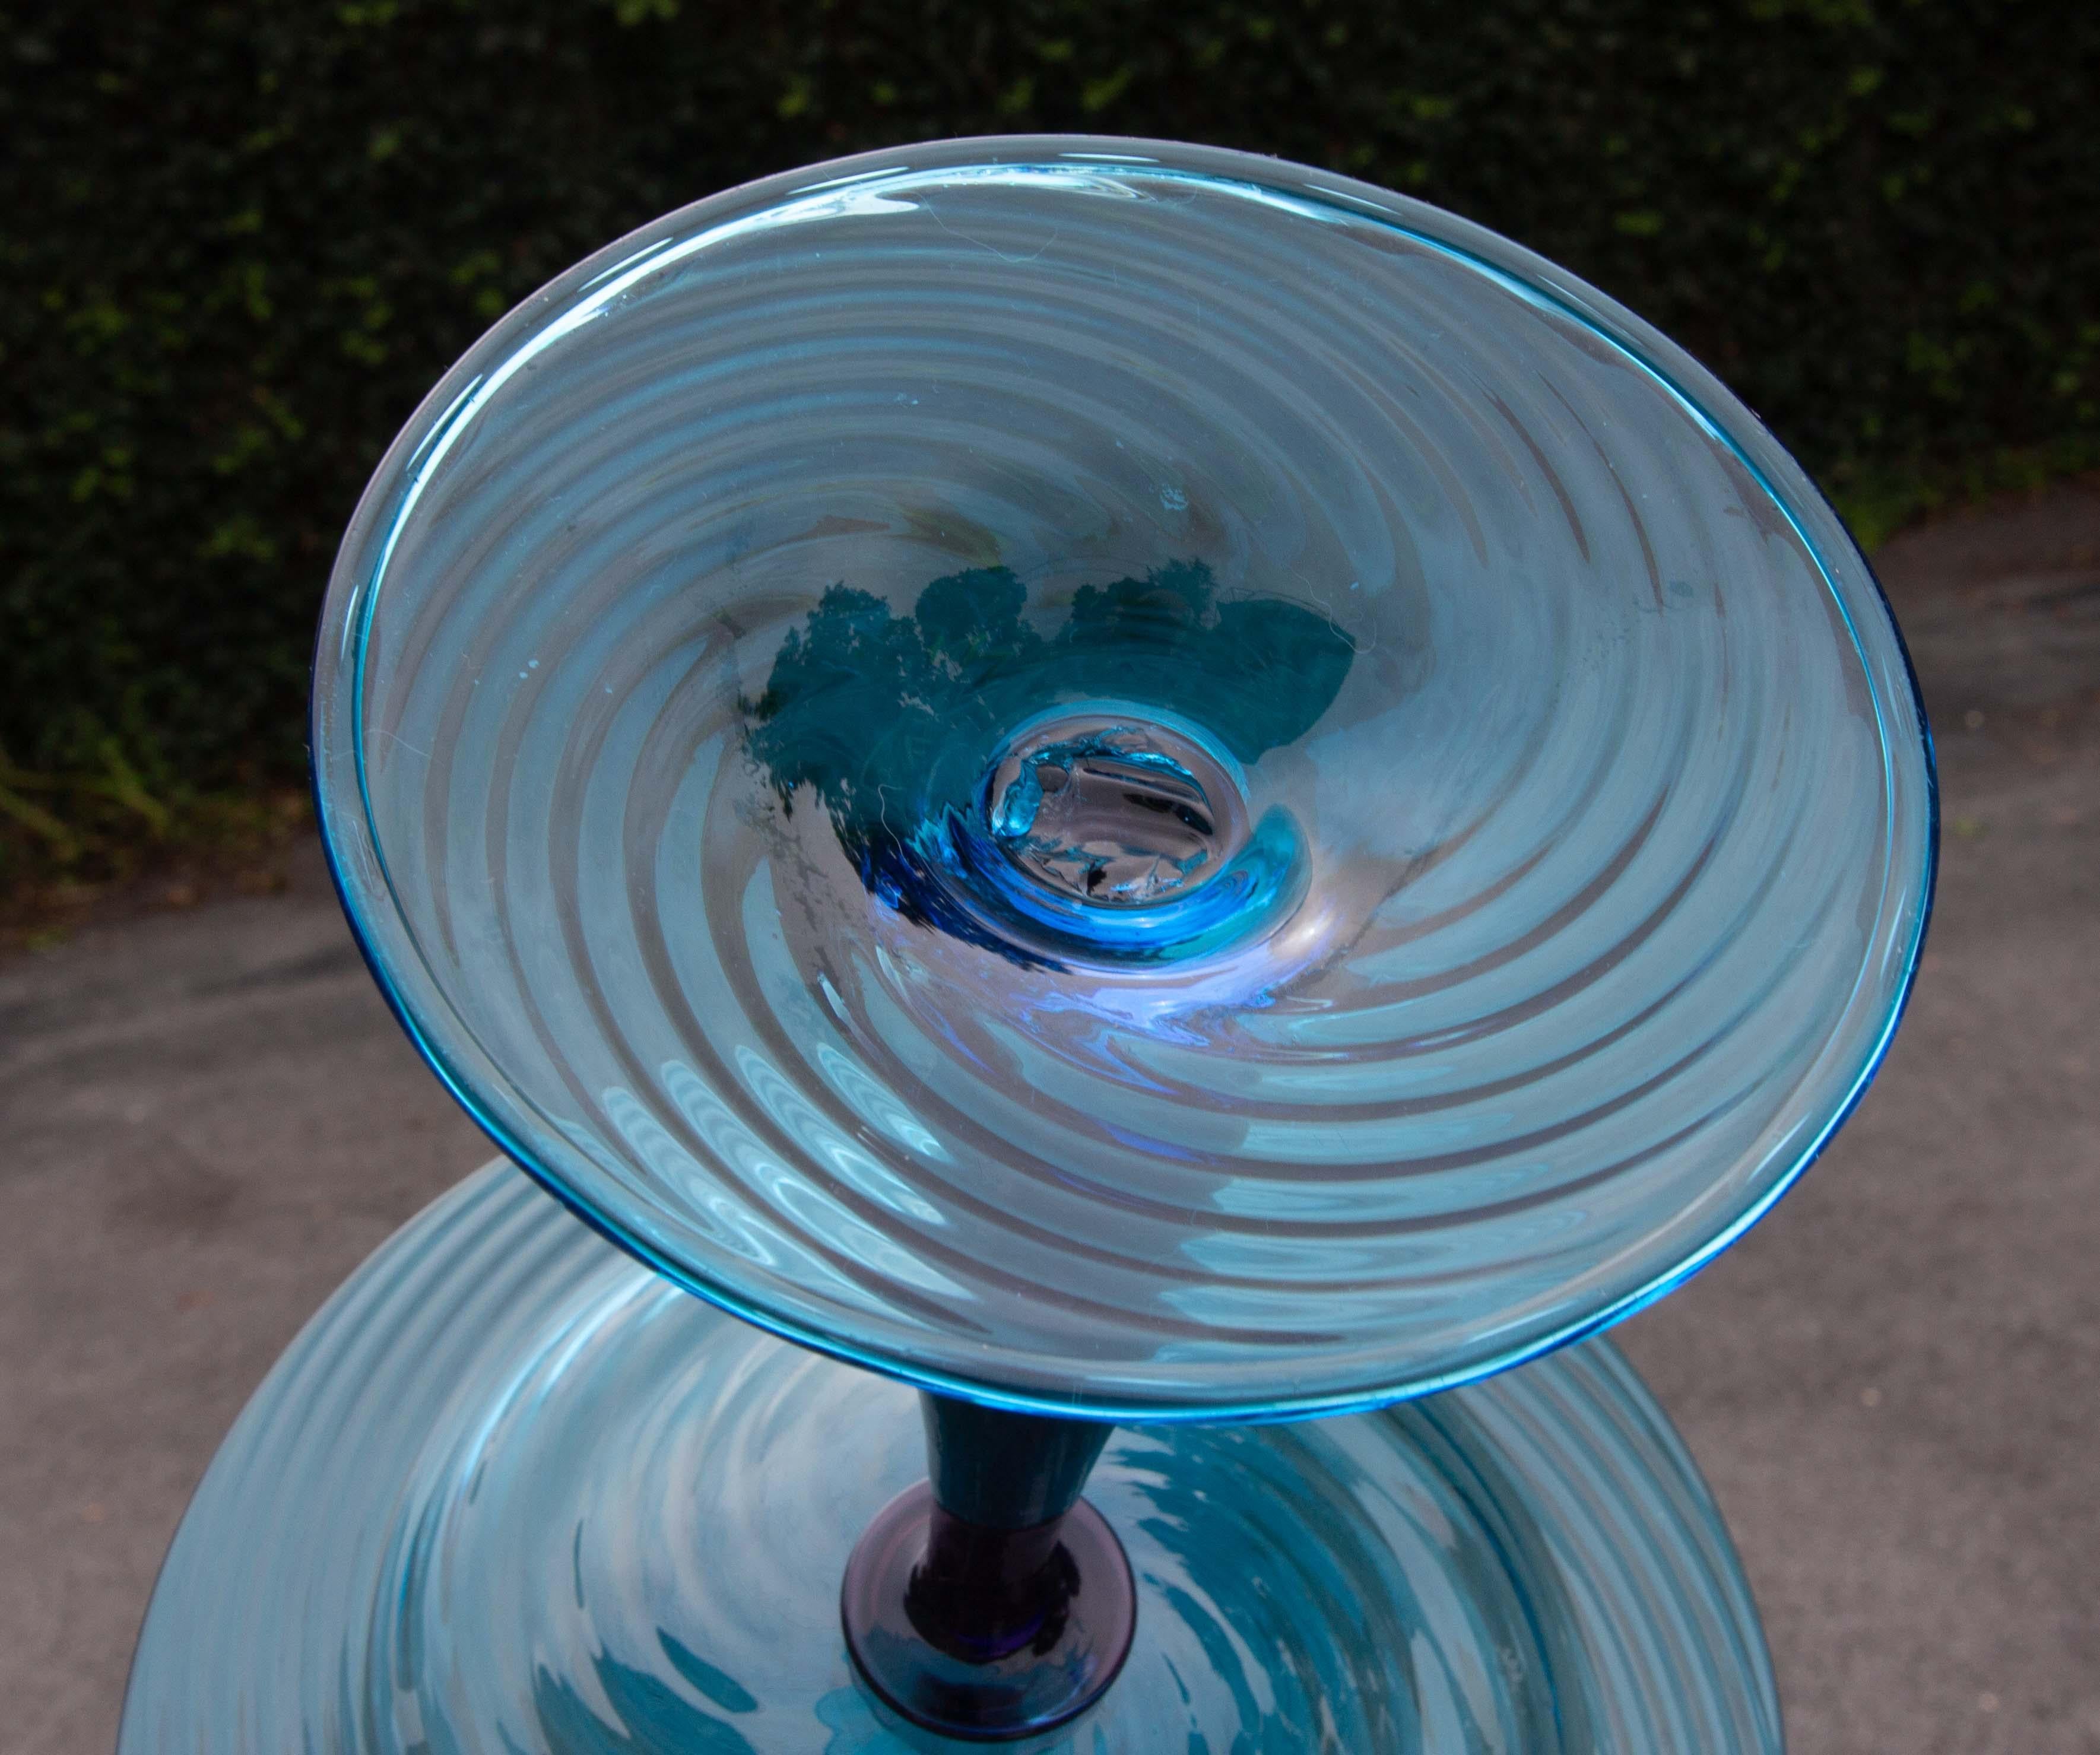 Hand crafted glass compote by Steuben. Celeste blue and amethyst glass with flecks. Circa 1920's. Includes vintage 1933 guide to Steuben. 